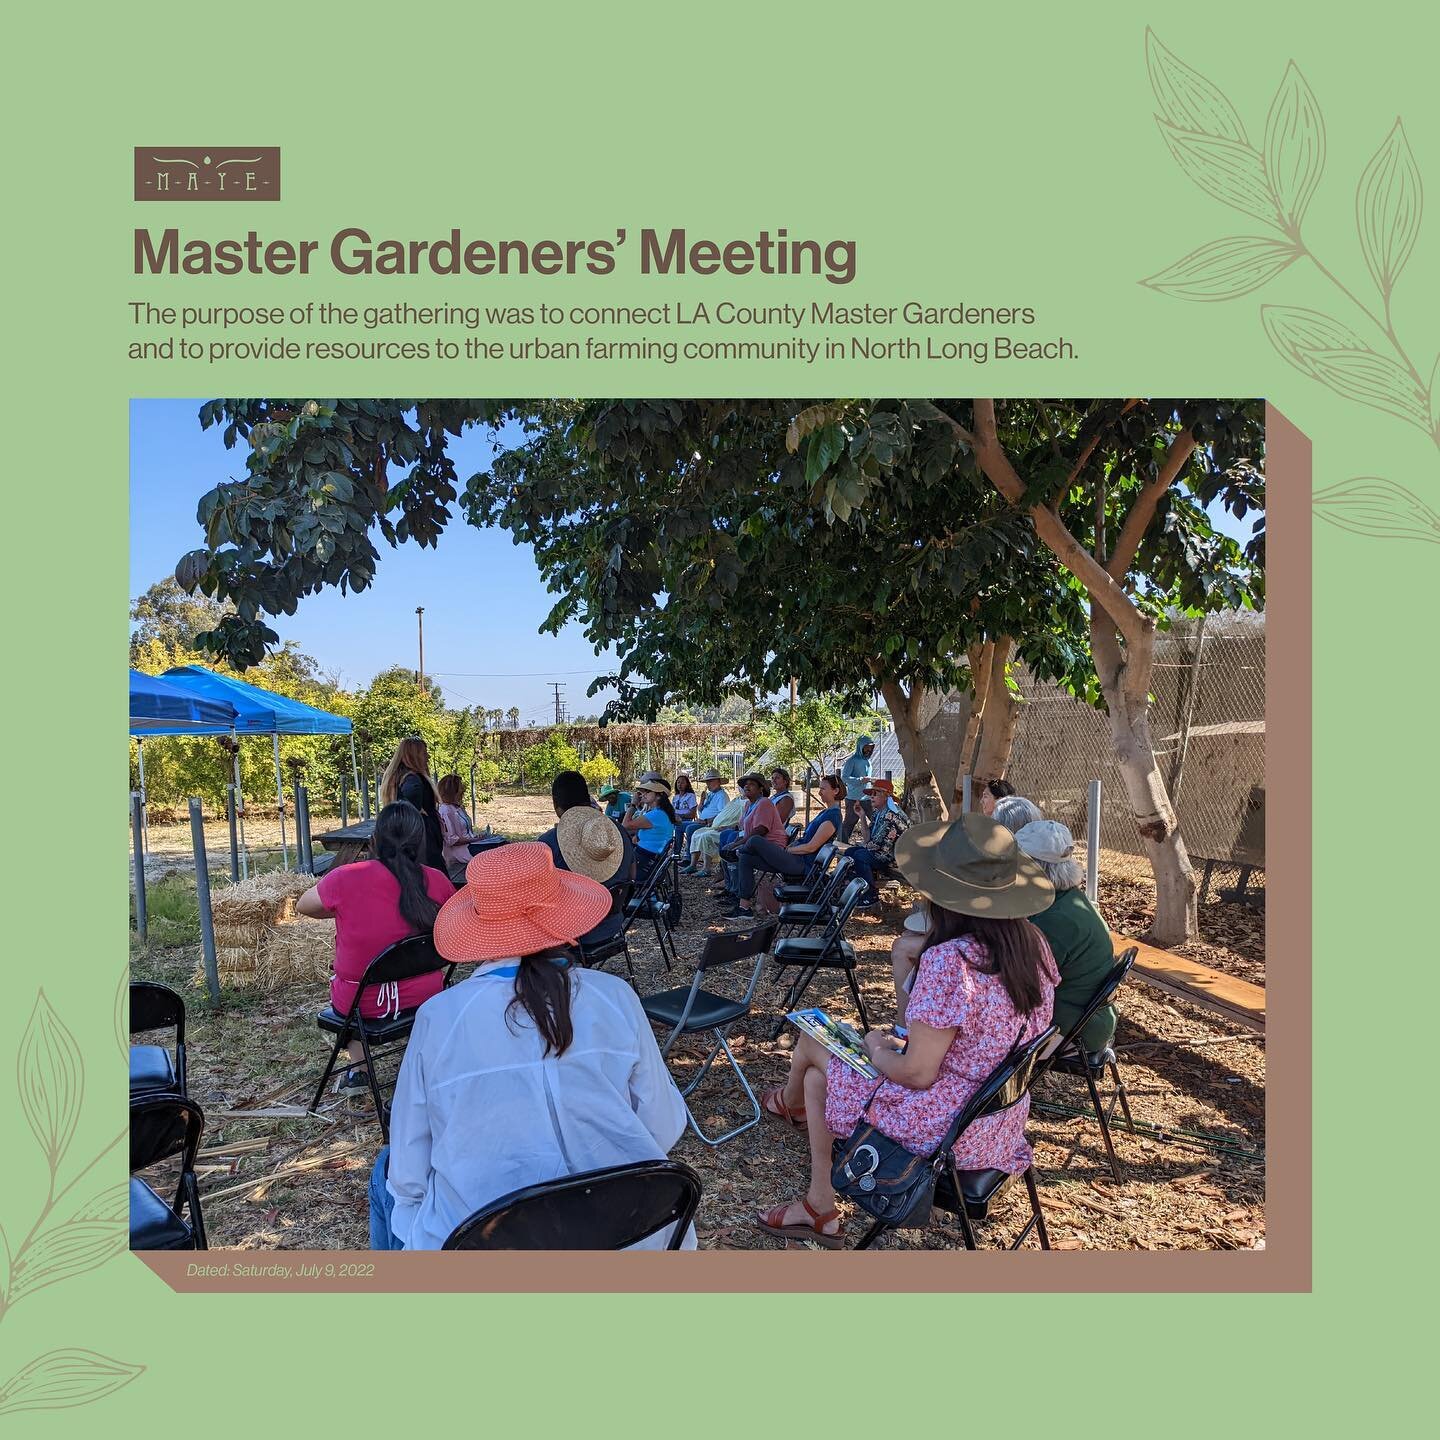 🪴 Today, the Master Gardeners&rsquo; Meeting took place at the Growing Experience Urban Farm! 

🧑&zwj;🌾 The purpose of the gathering was to connect LA County Master Gardeners and to provide resources to the urban farming community in North Long Be